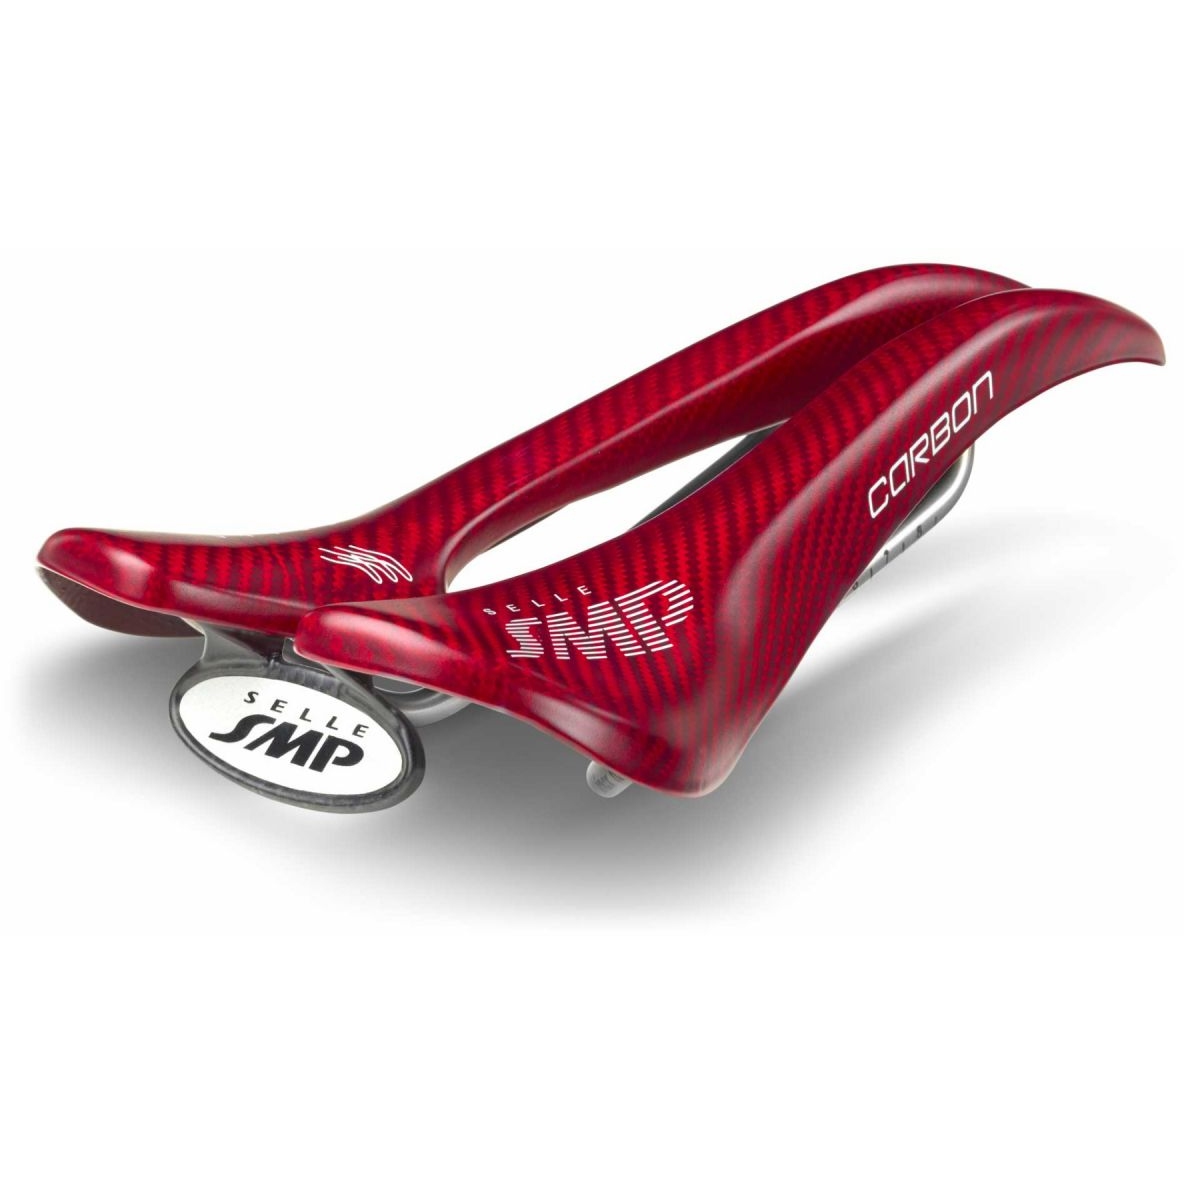 Image of Selle SMP Carbon Saddle - red